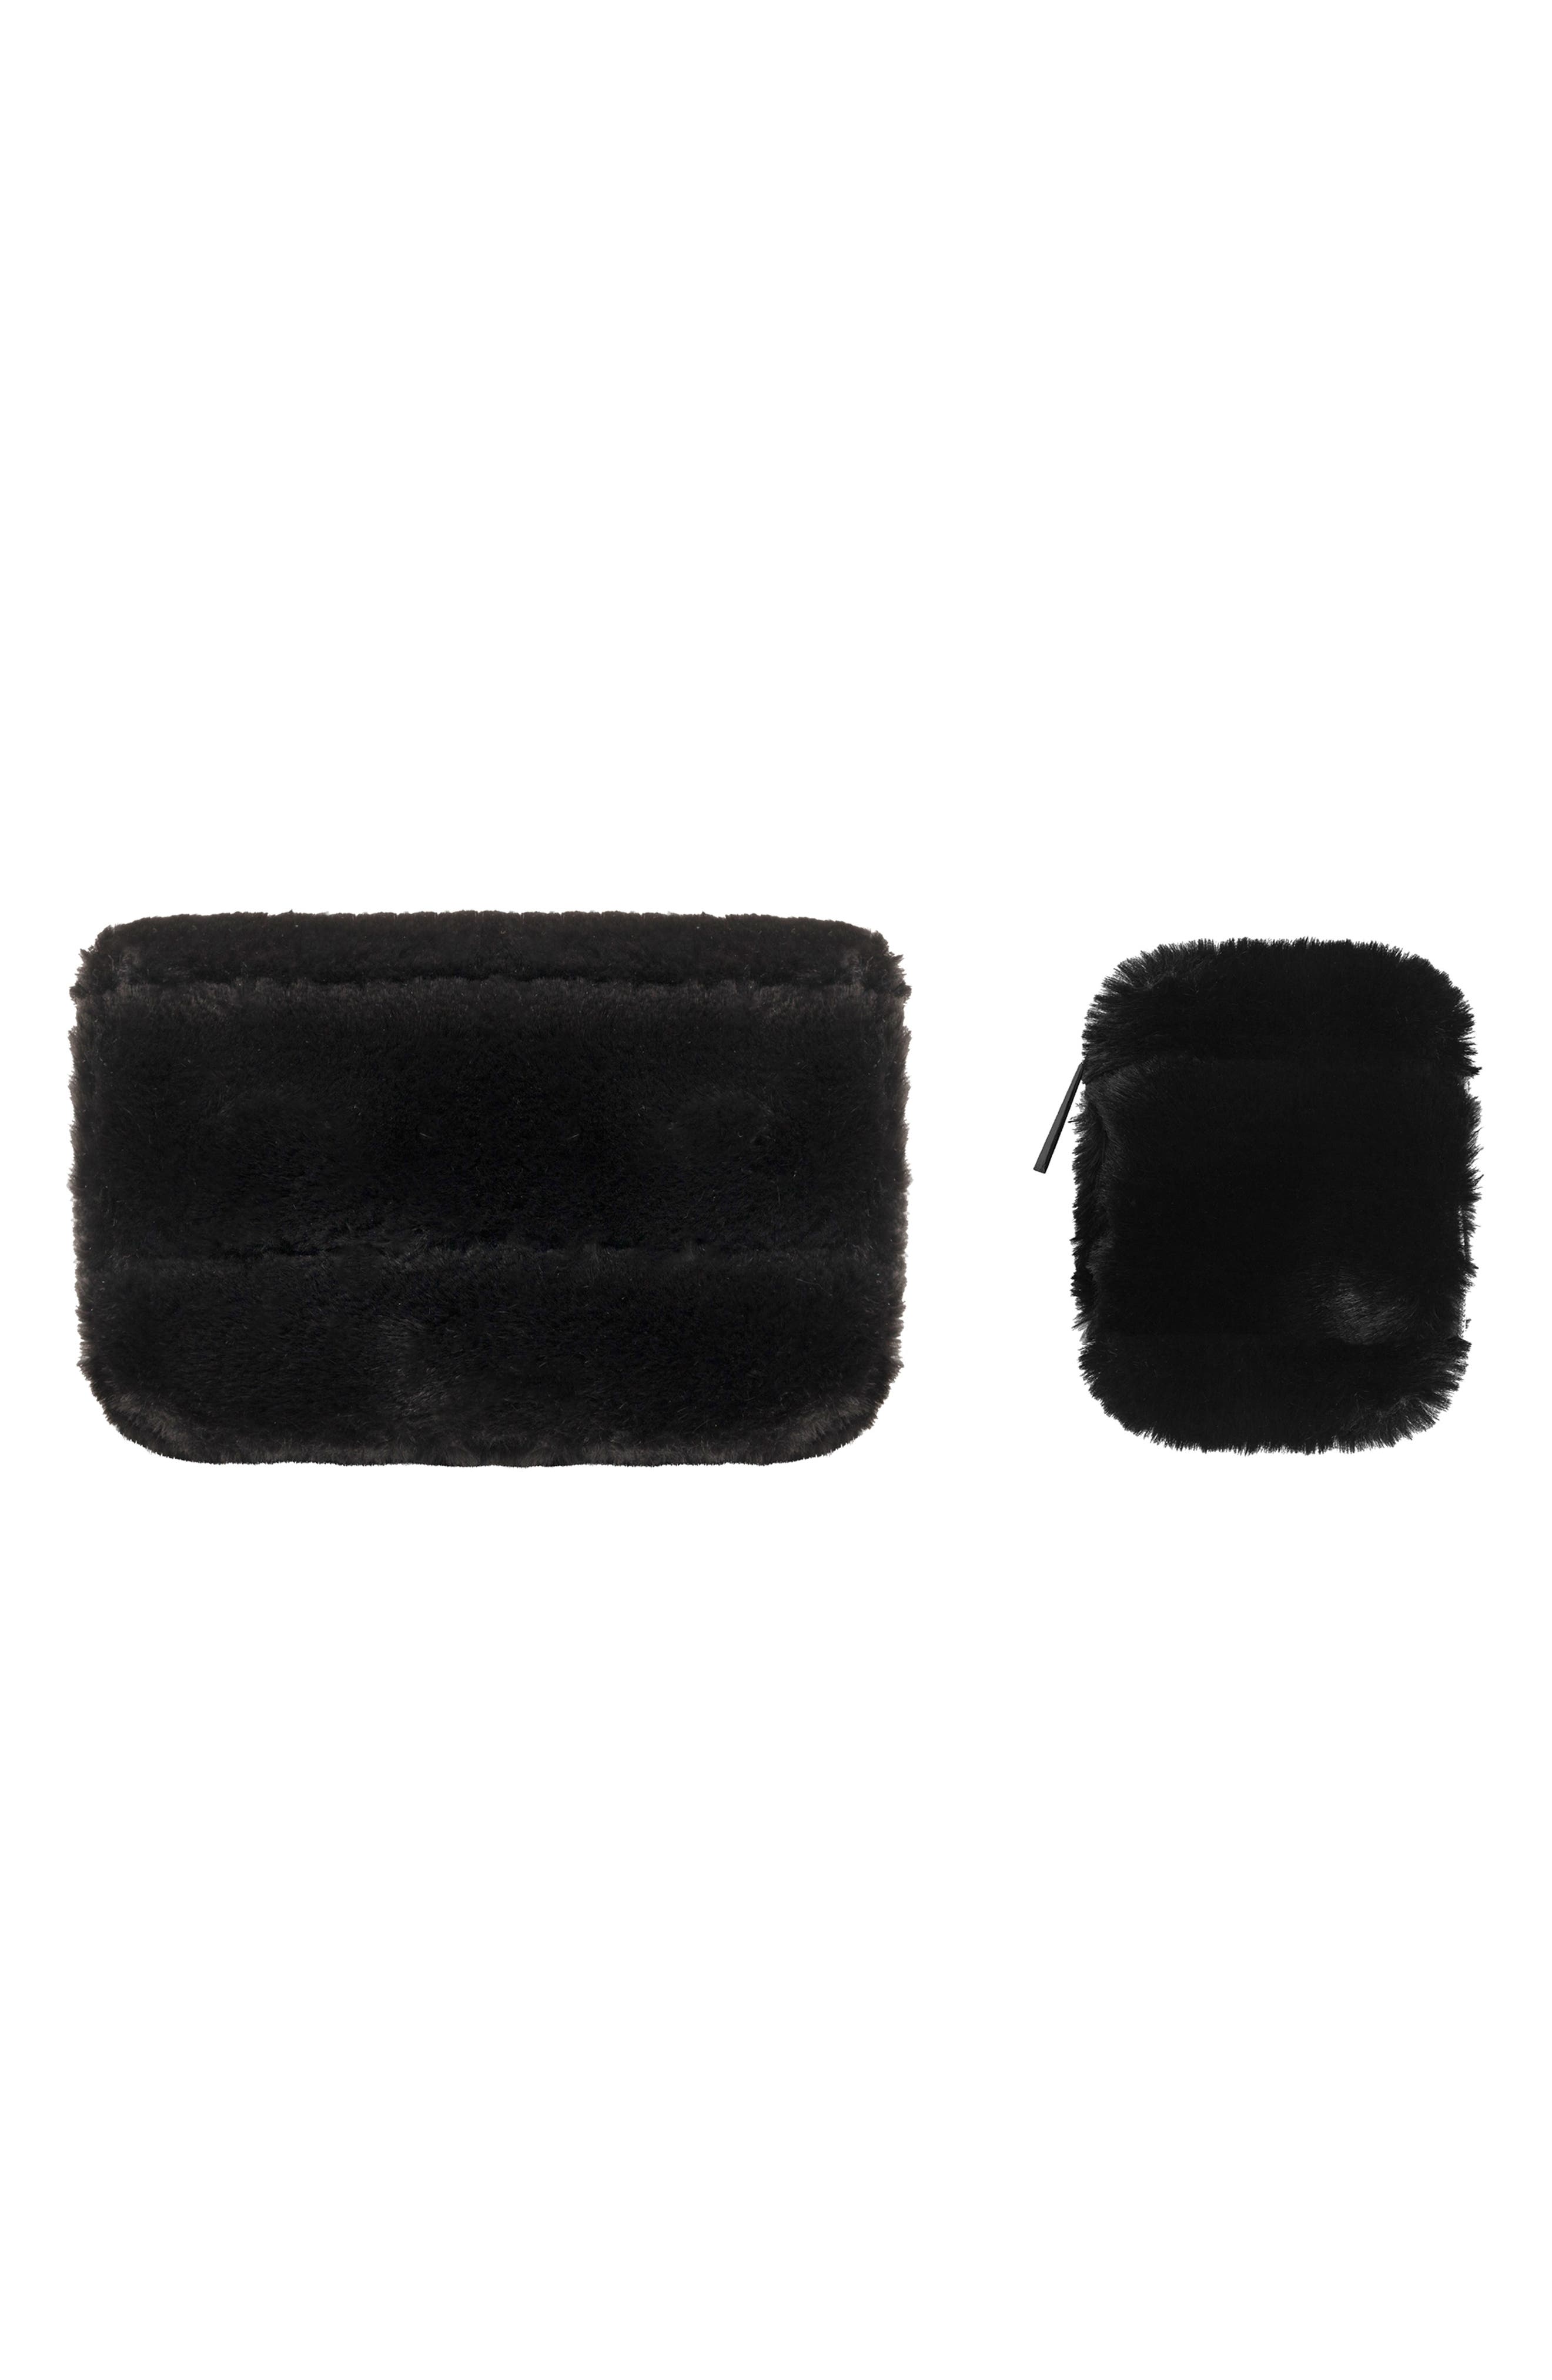 MYTAGALONGS Faux Fur Earbud & Tech Accessory Cases in Cream at Nordstrom